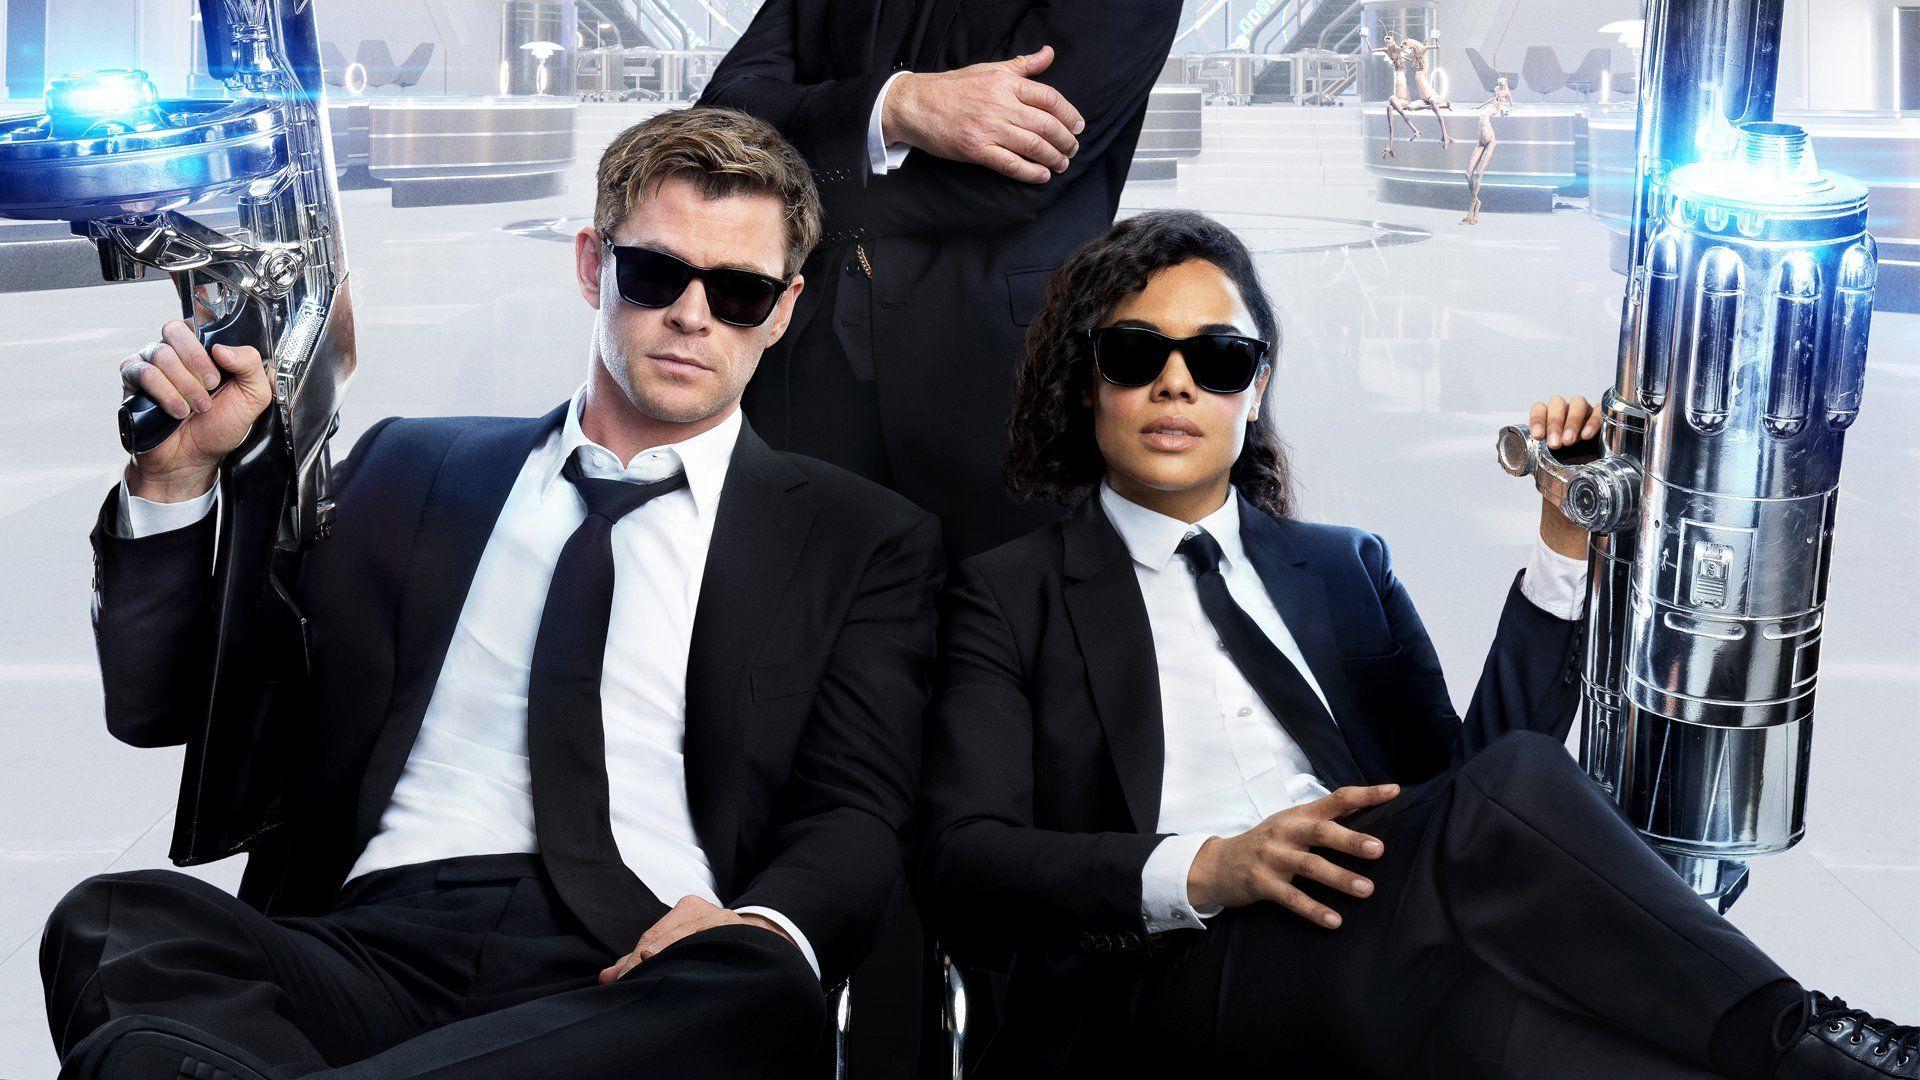 Download Men In Black wallpapers for mobile phone free Men In Black HD  pictures